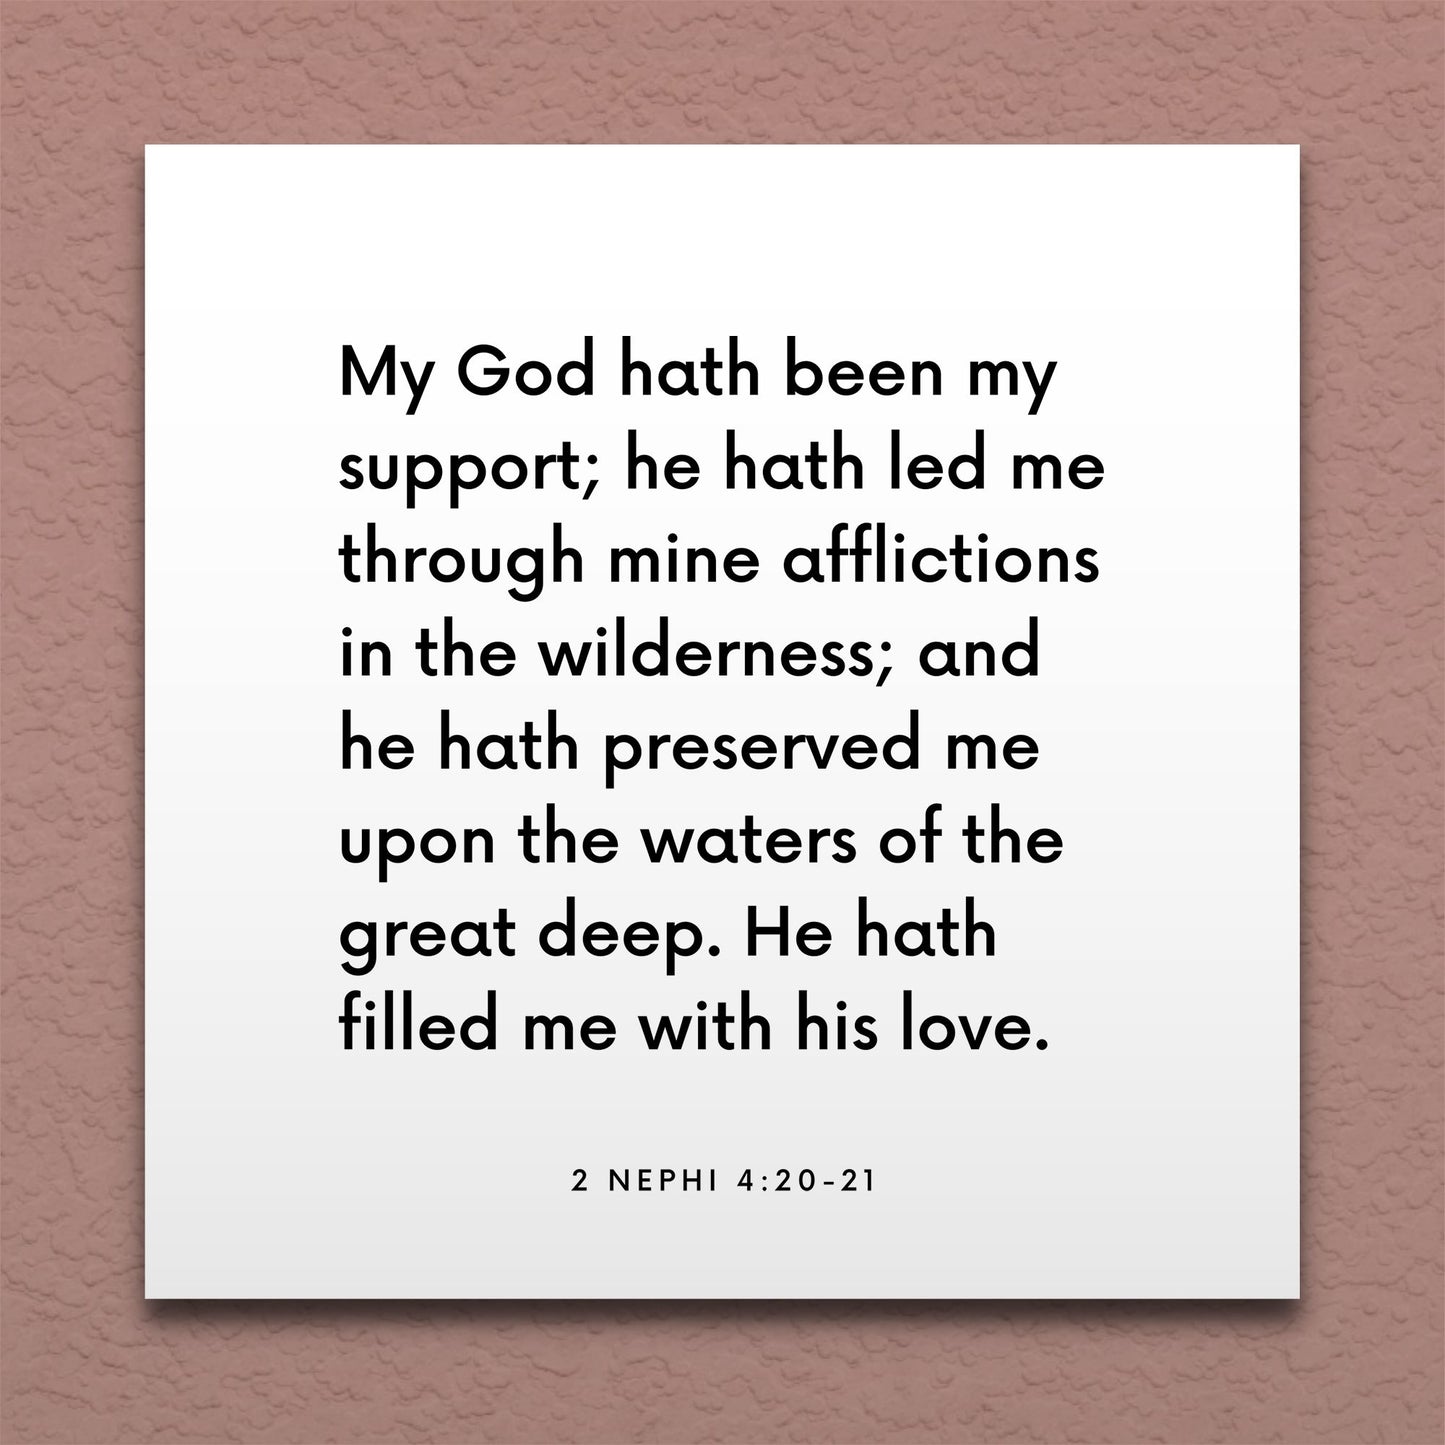 Wall-mounted scripture tile for 2 Nephi 4:20-21 - "My God hath been my support"